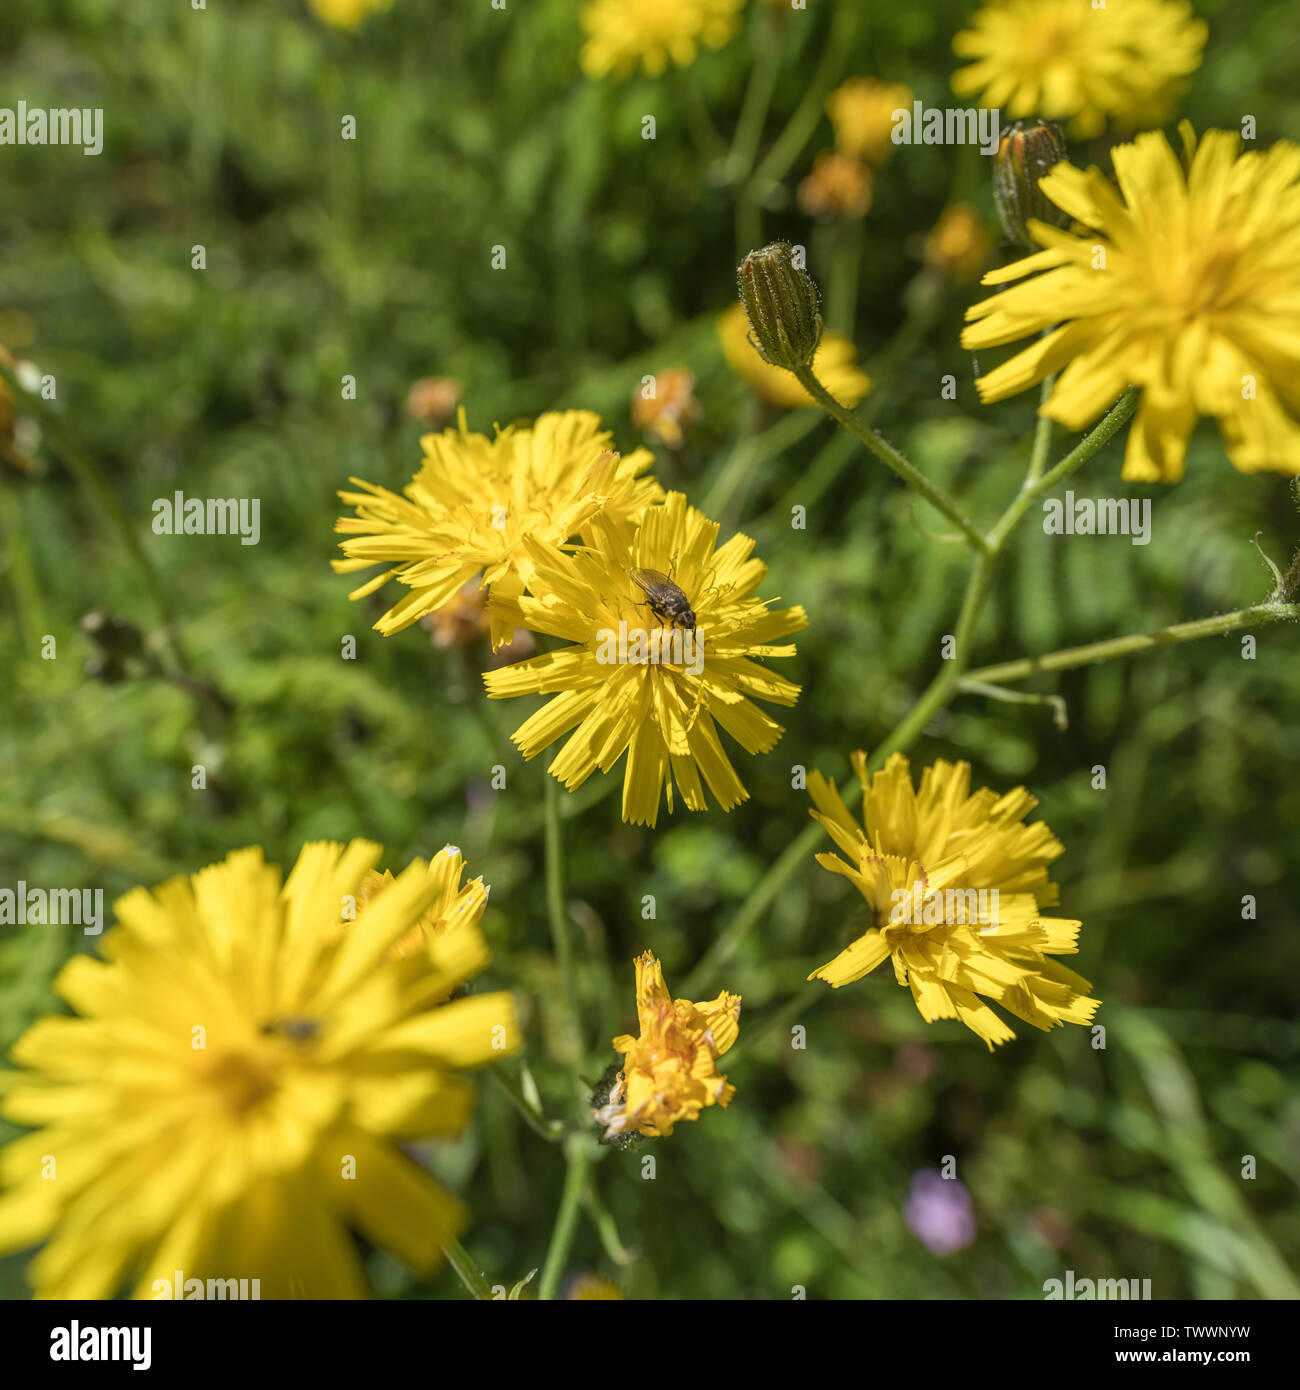 Possibly yellow flowers of Nipplewort / Lapsana communis, but unsure. Certainly a Daisy. Young nipplewort leaves may be eaten cooked as survival food Stock Photo